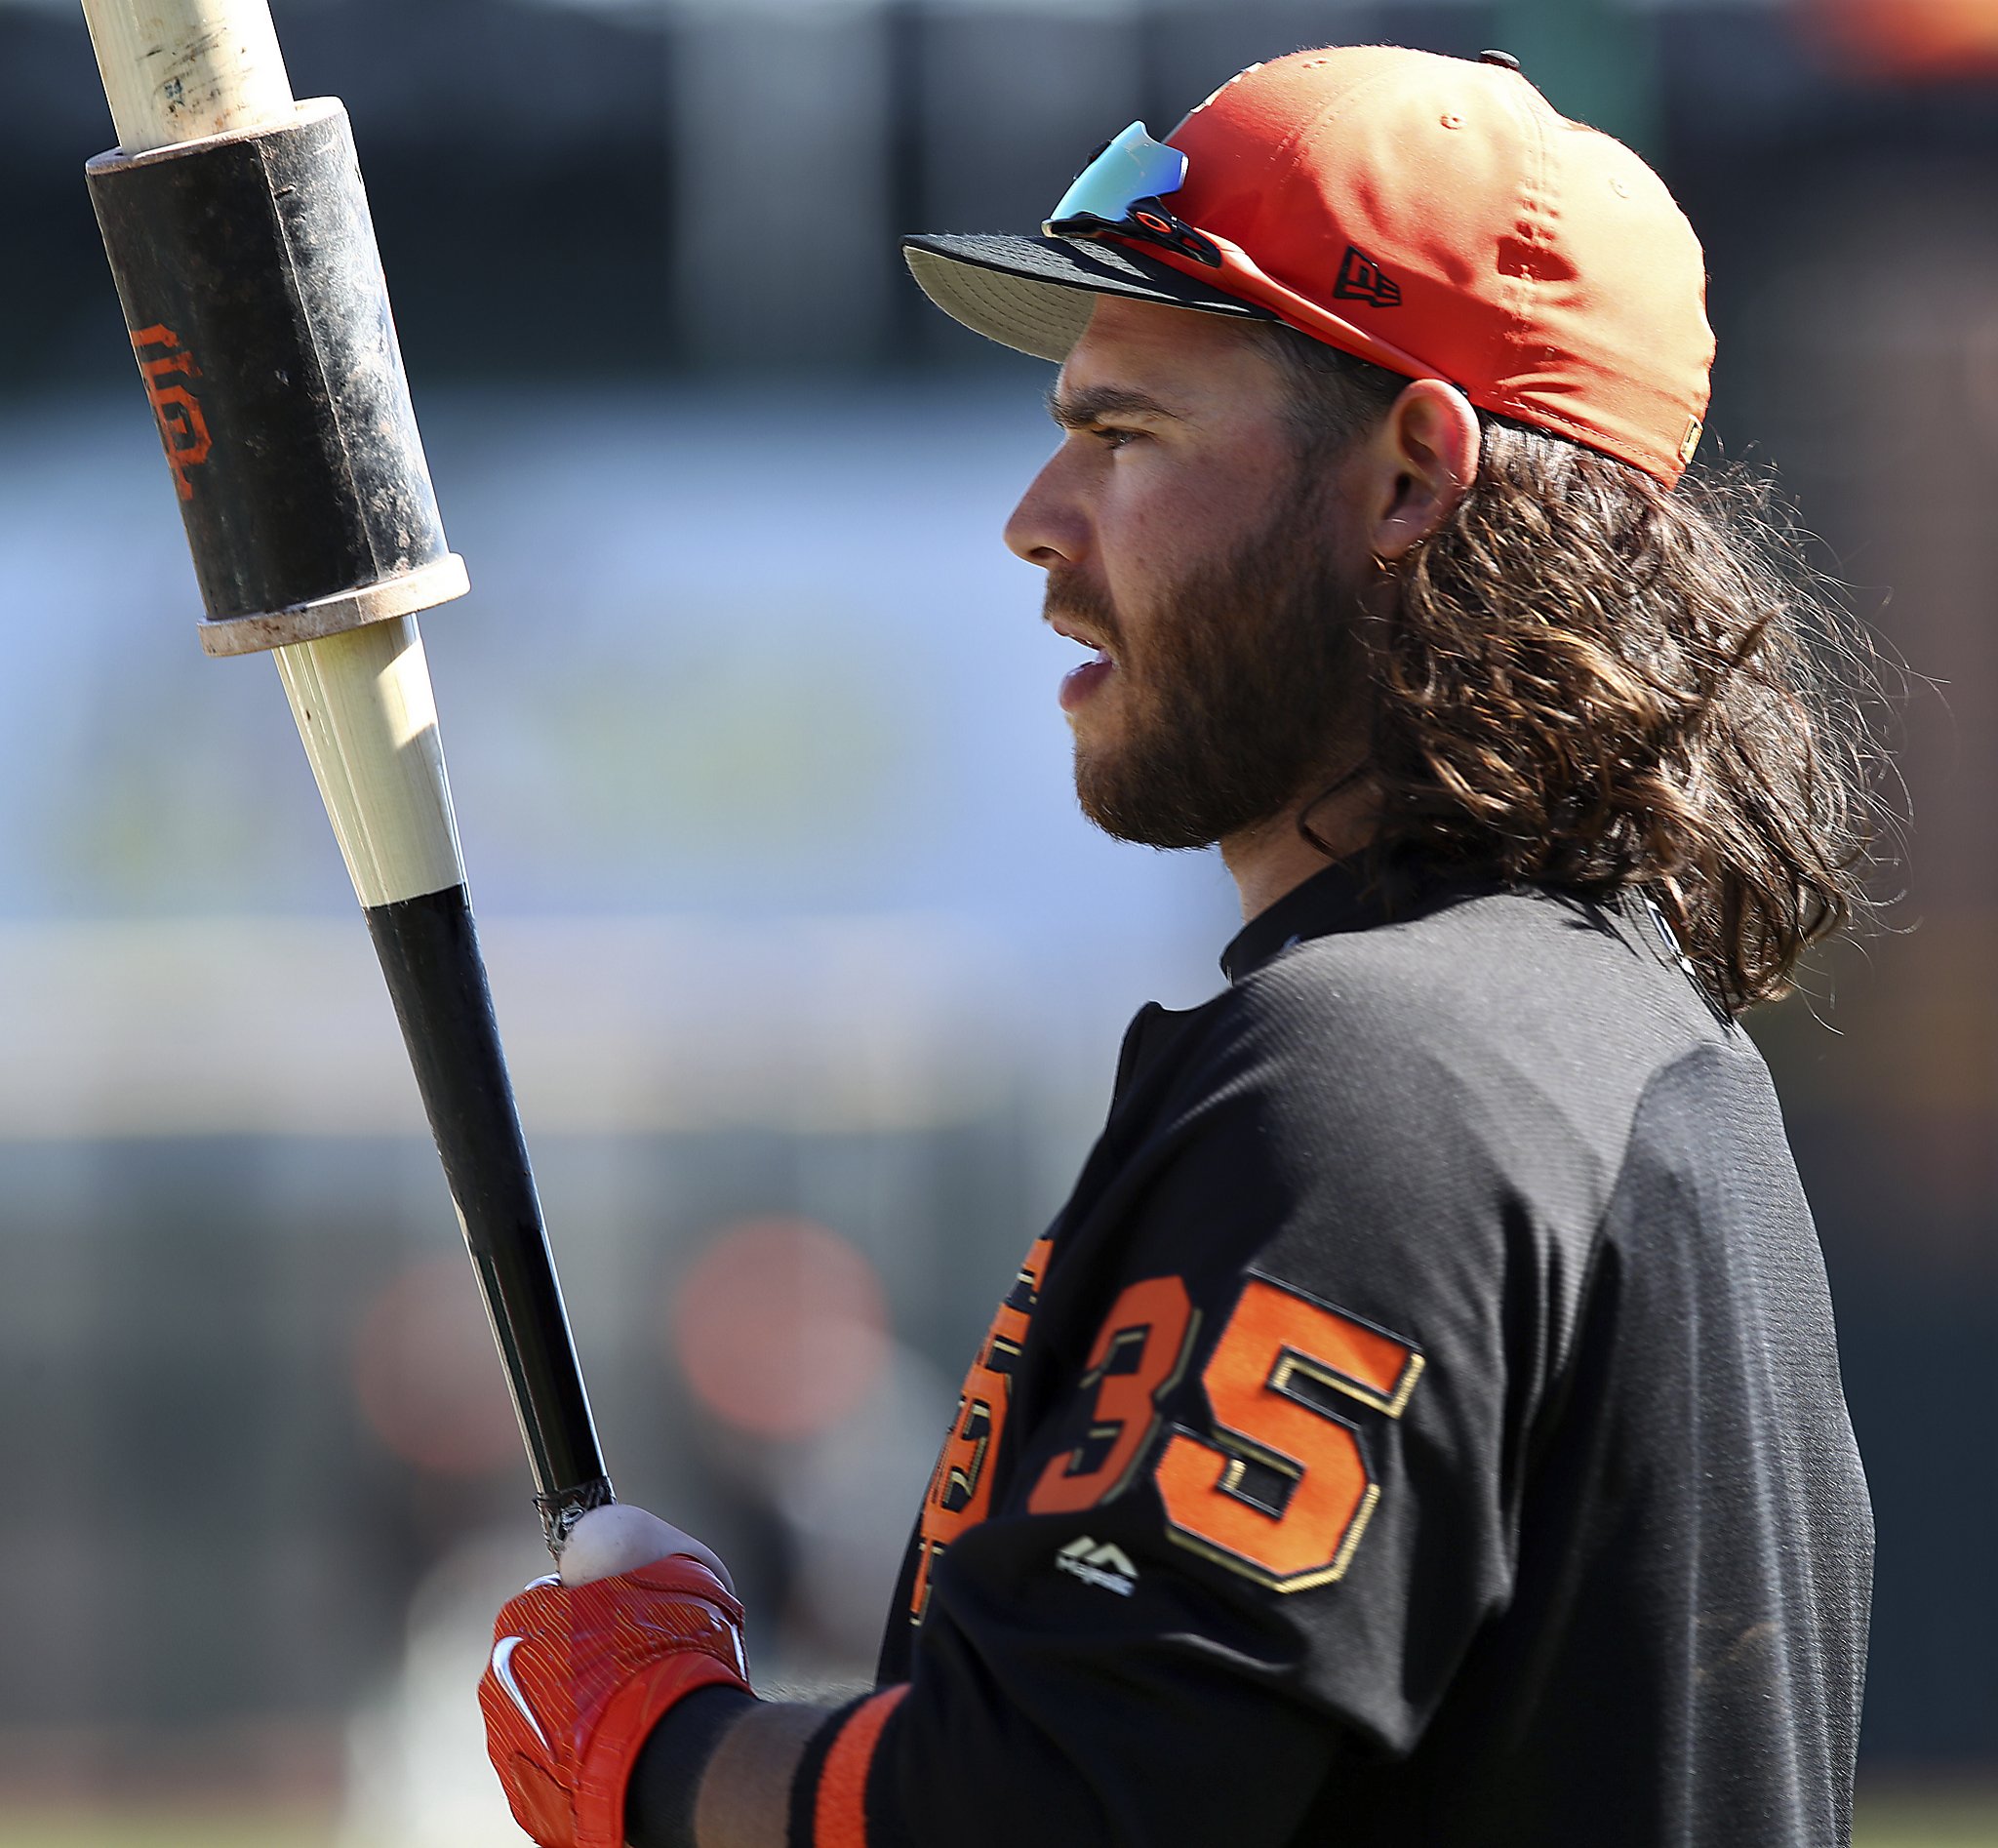 May 28, 2012: Giants shortstop Brandon Crawford throws to first in